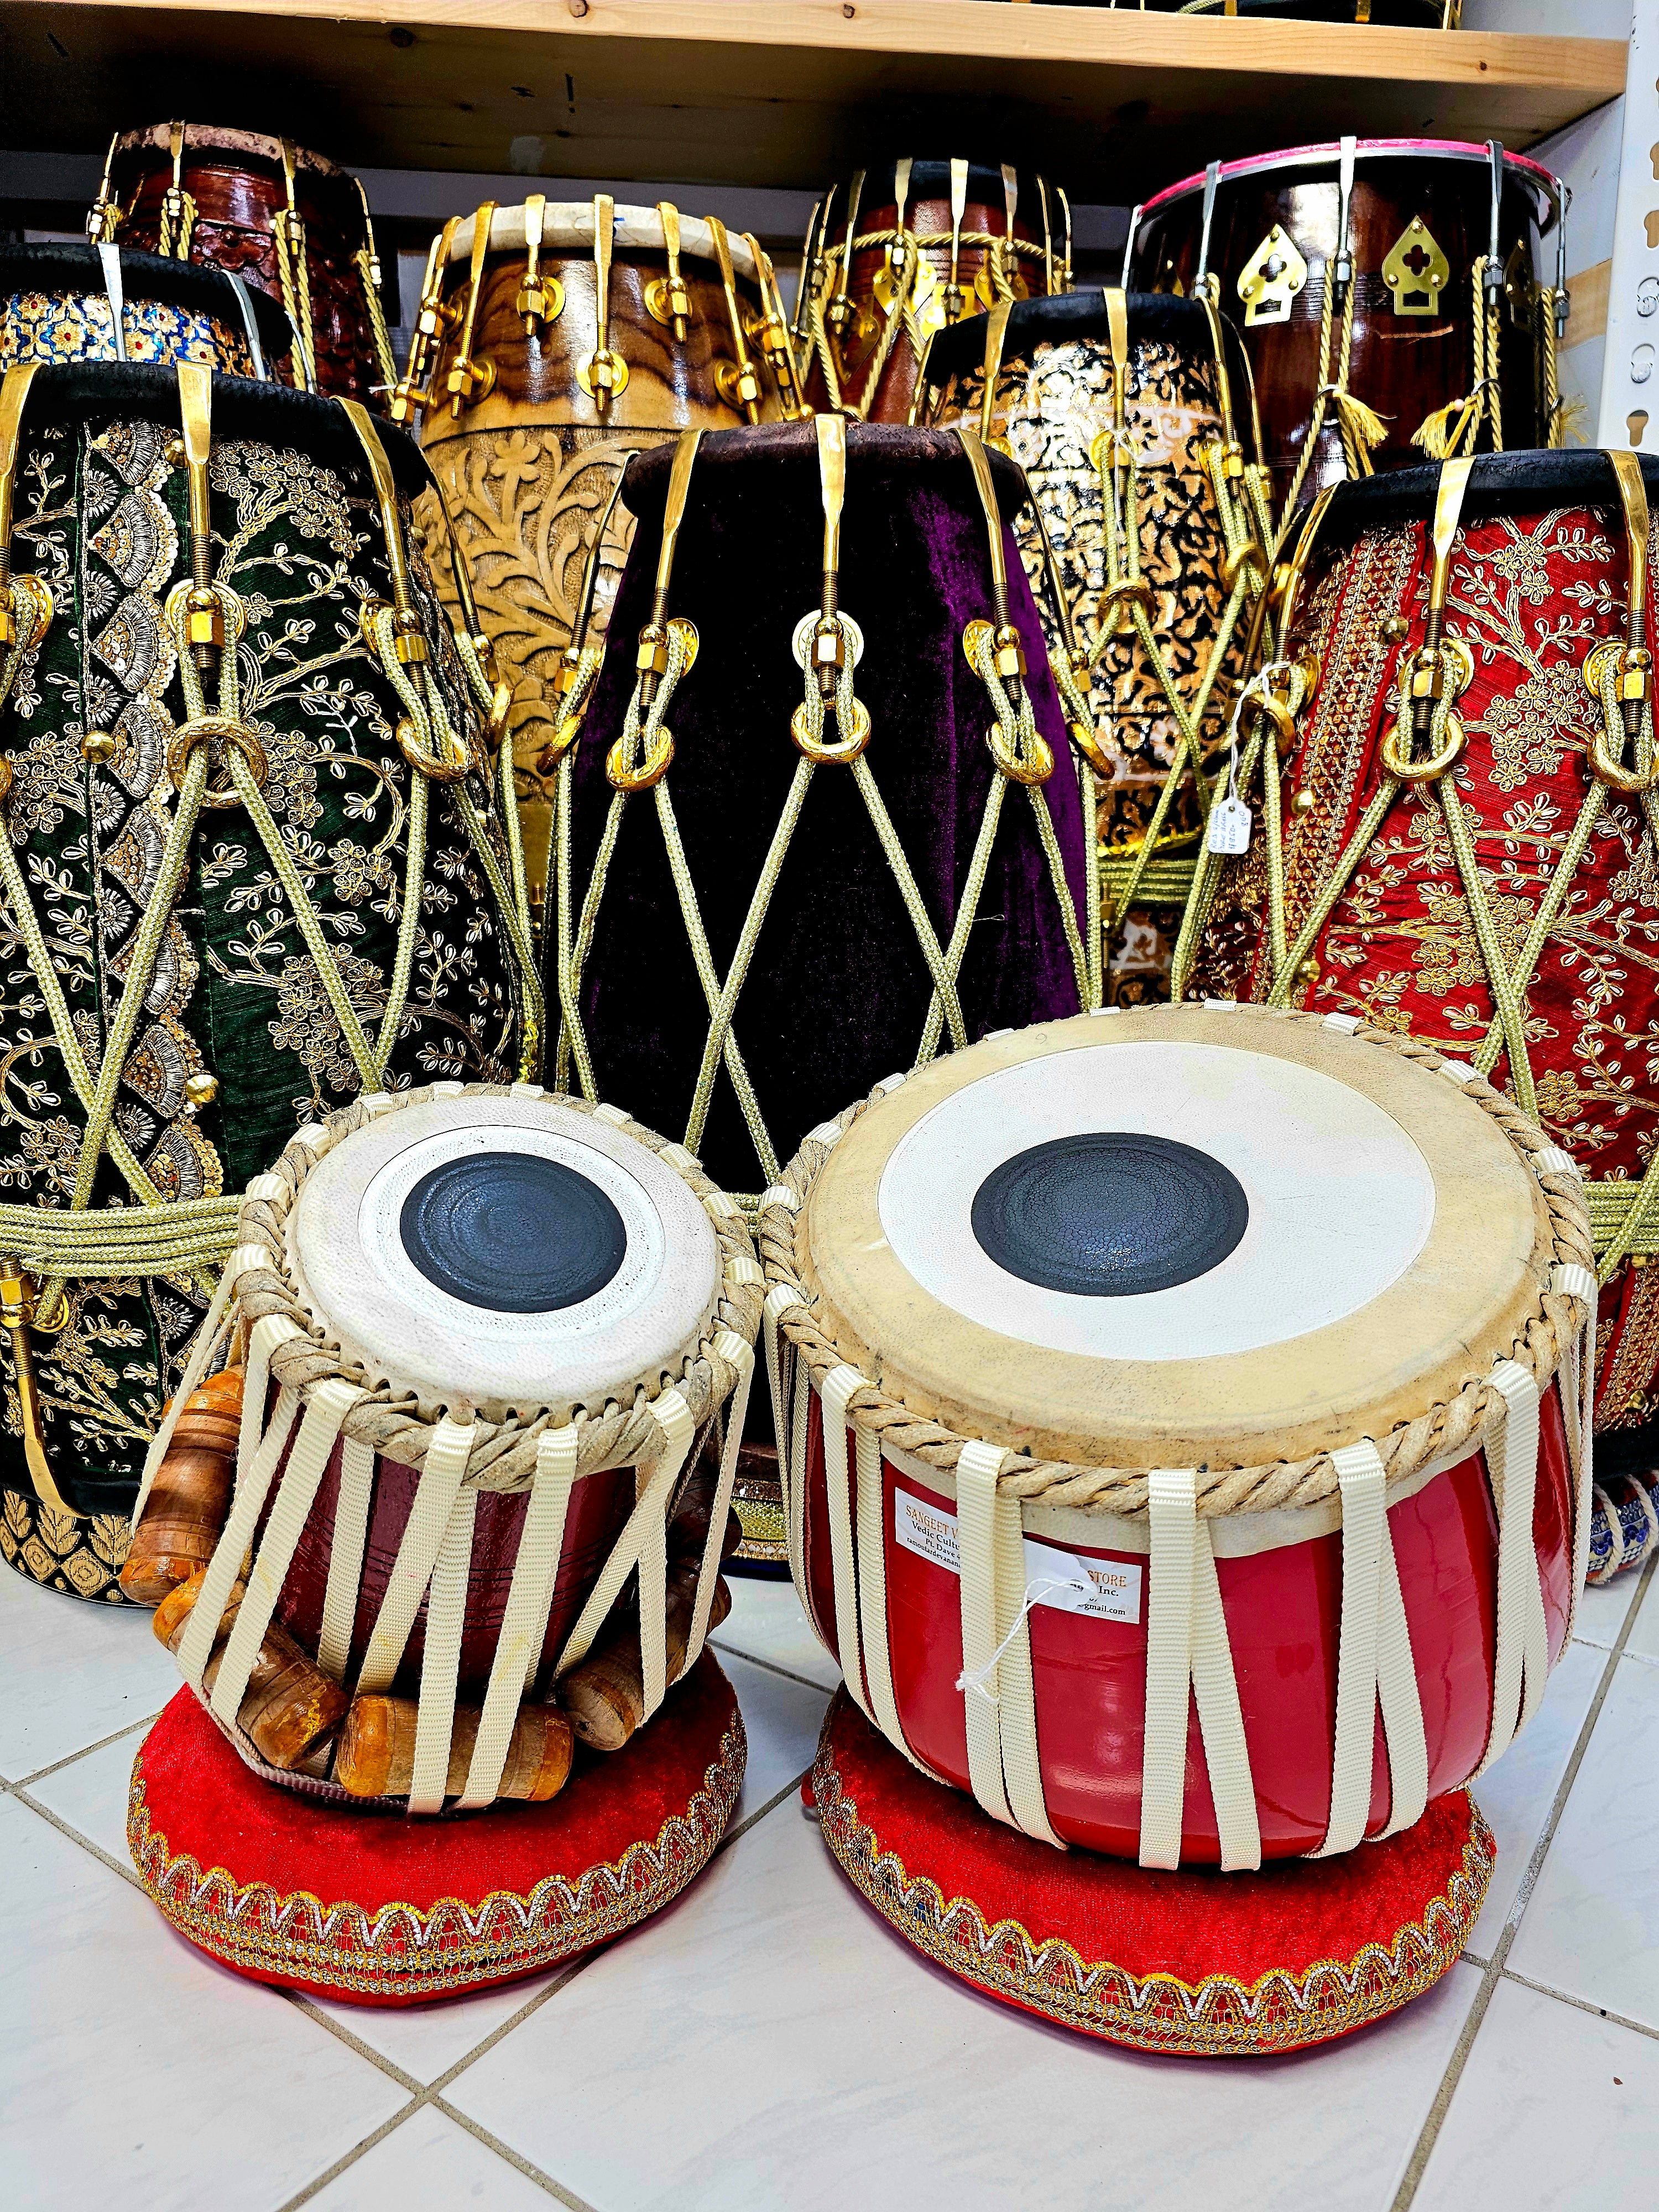 Rhythmic Rouge: 5" C# Mango Wood Dayan + 8.75" Steel Bayan Red Painted Tabla Set with Minor Buzzing Defect and Minor Cosmetic Defects